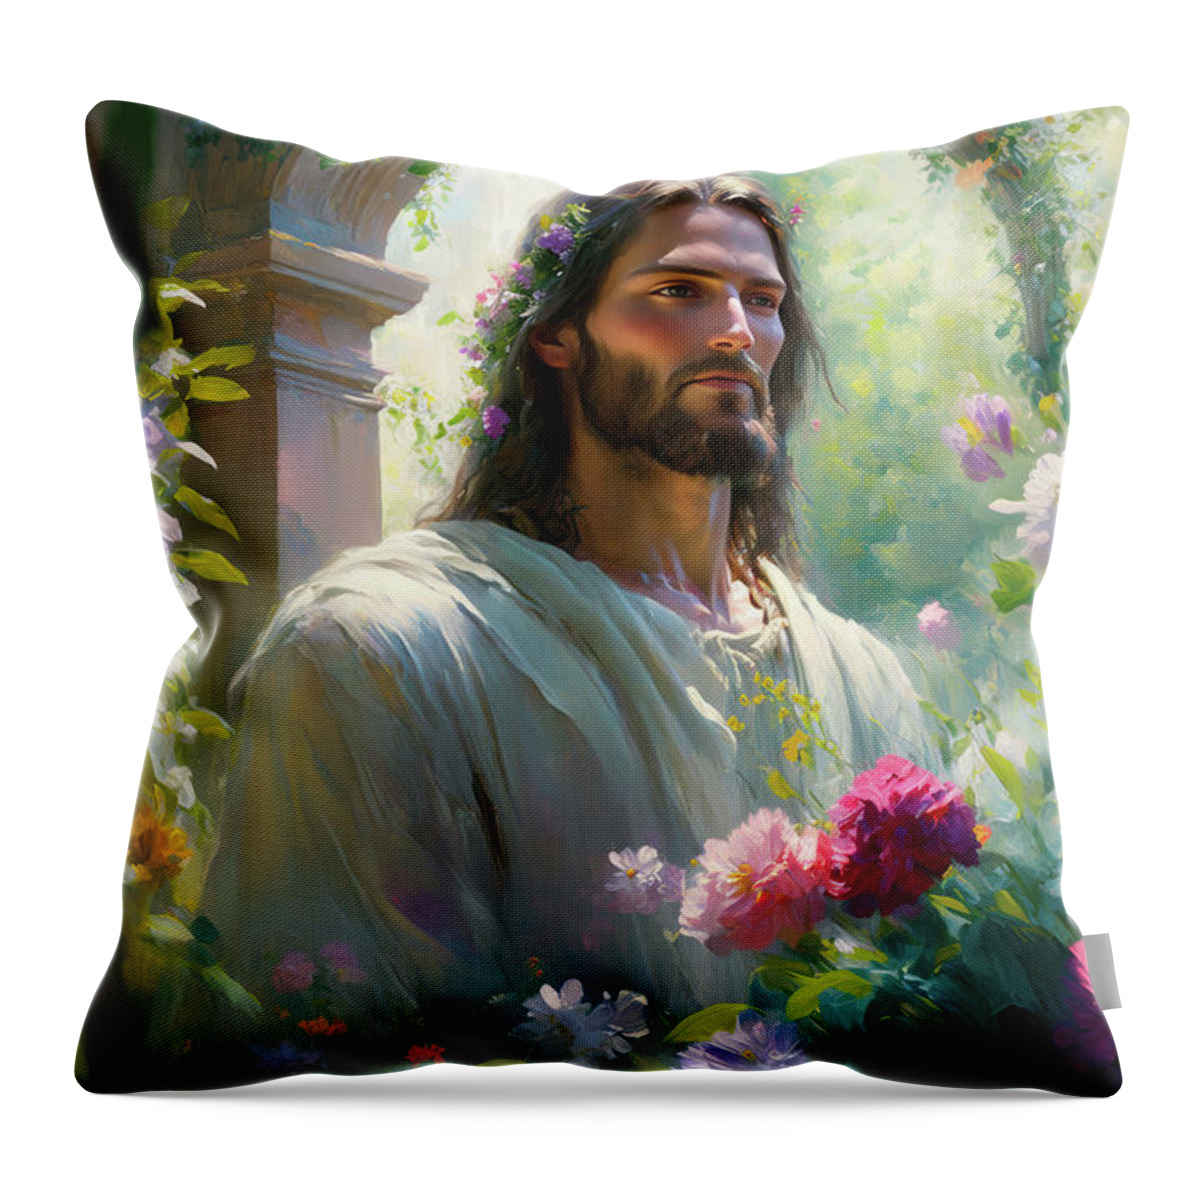 The Divine Gardener Throw Pillow featuring the painting The Divine Gardener by Greg Collins